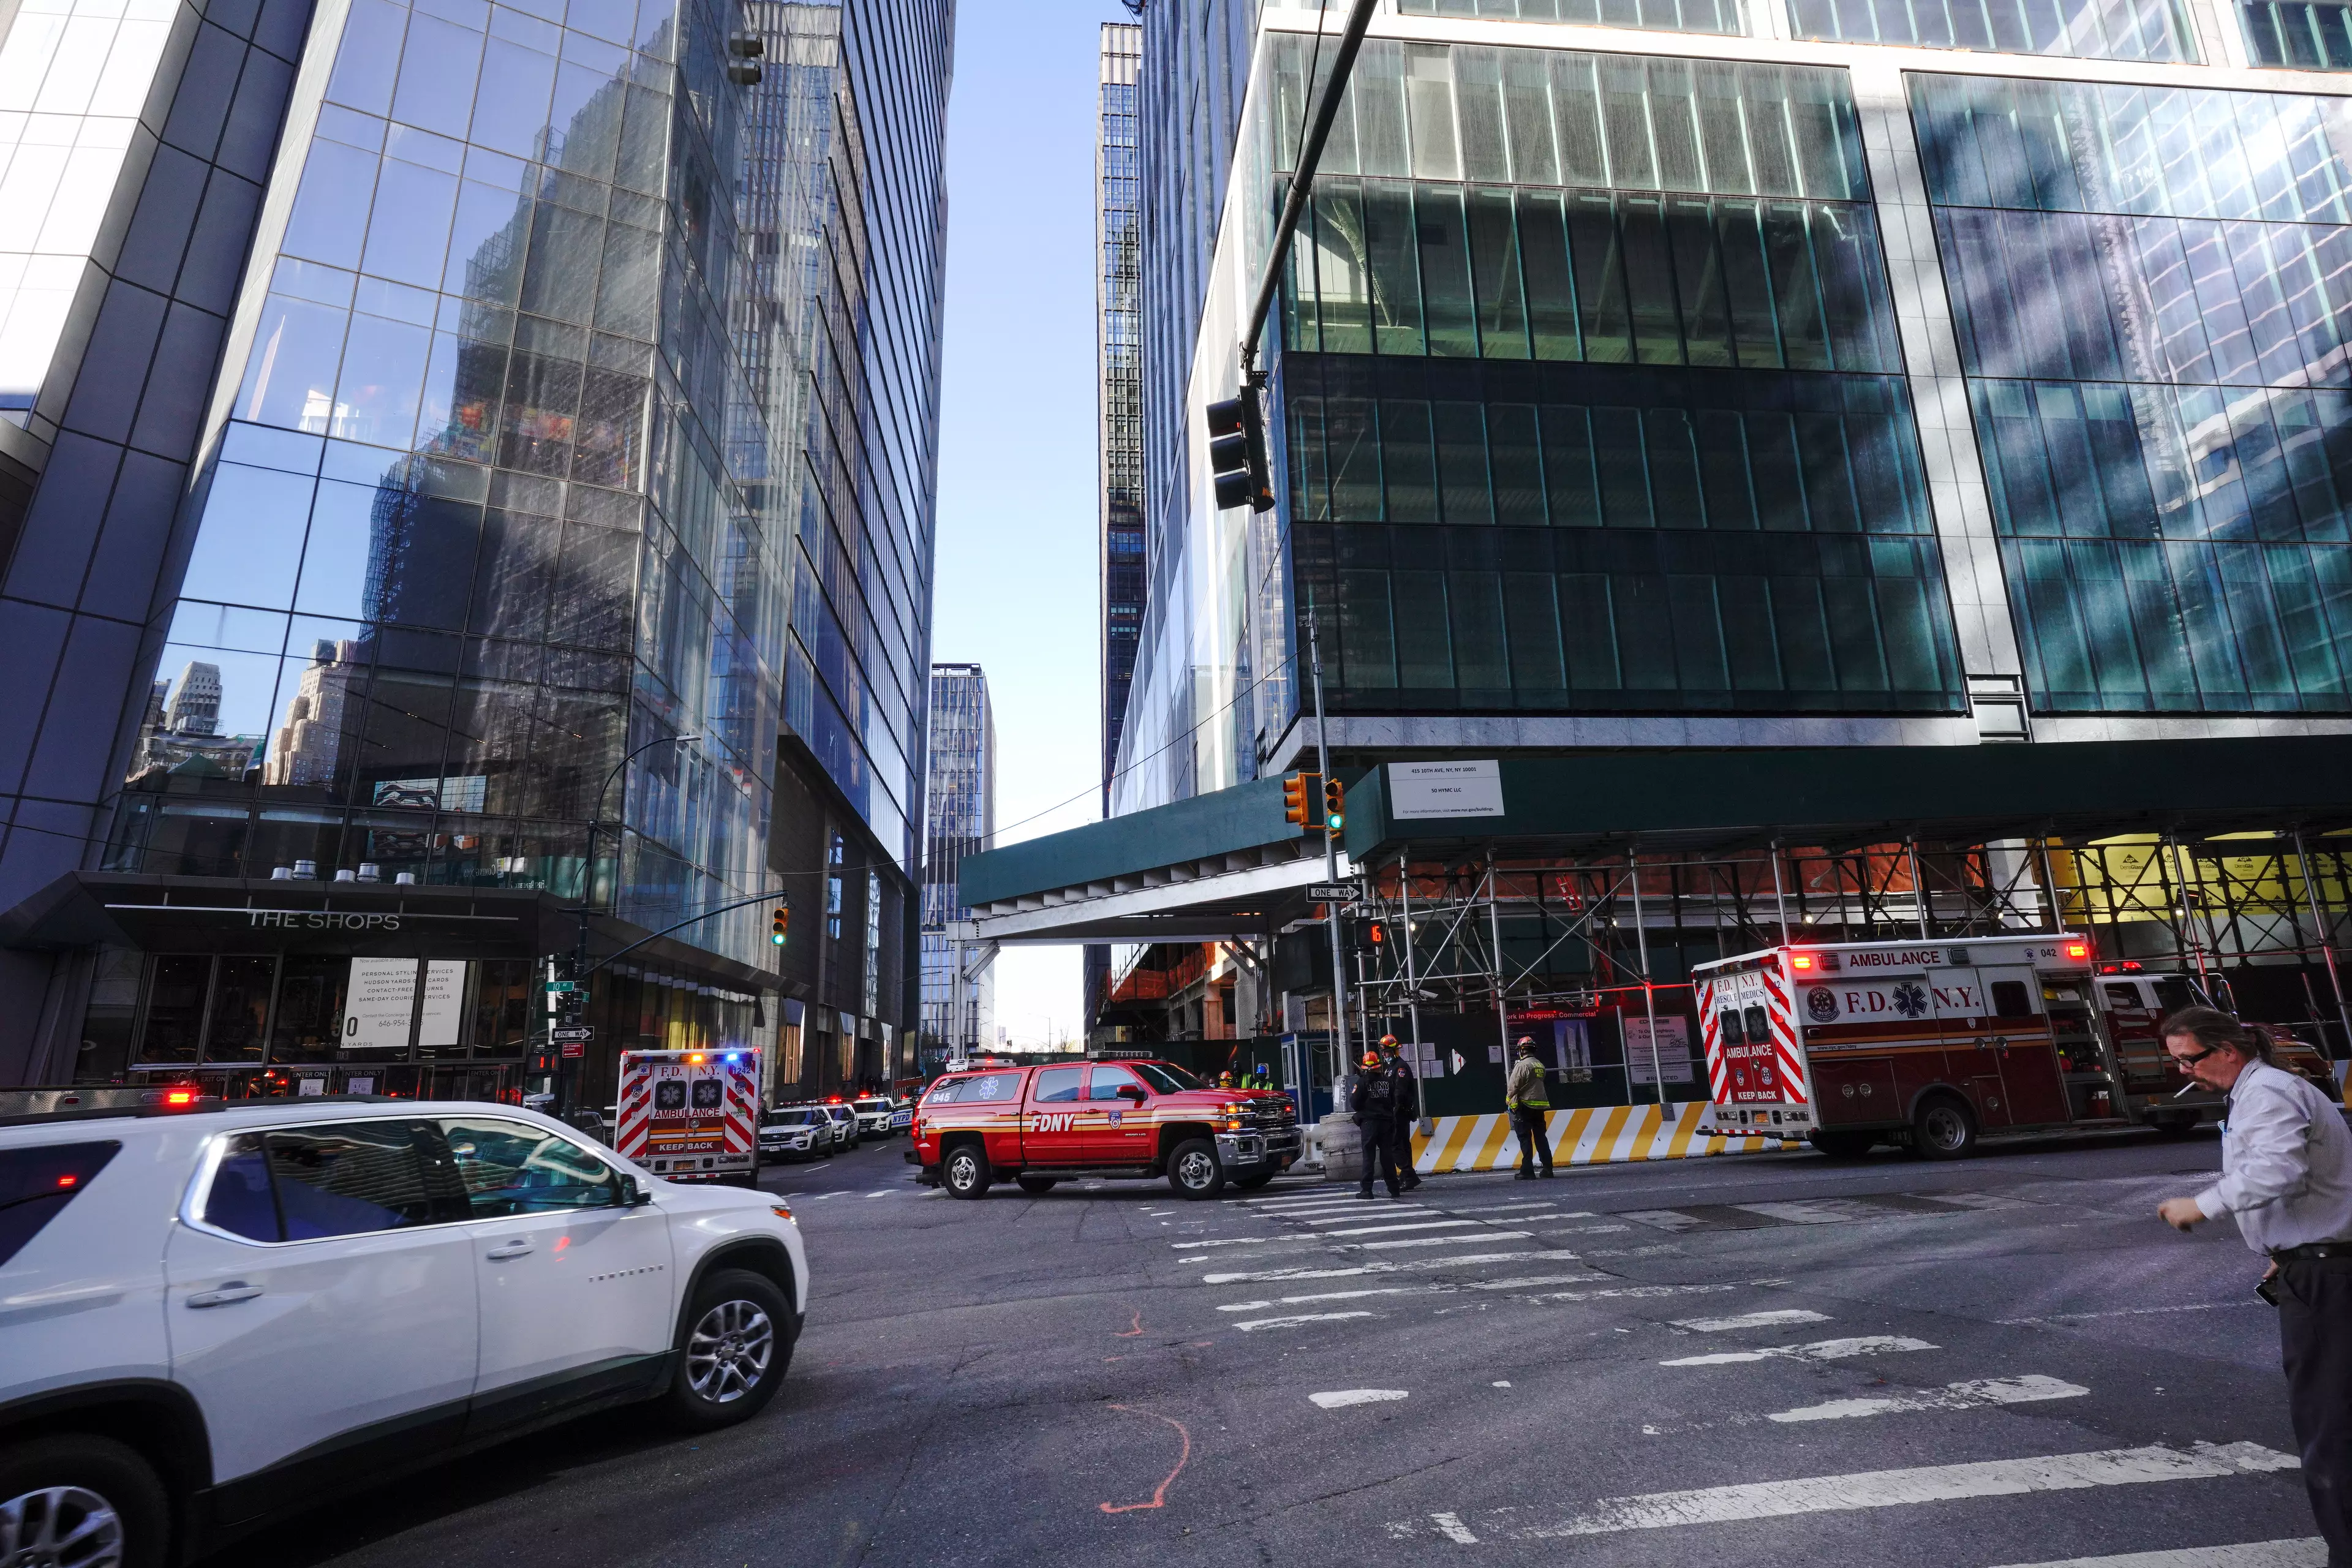 Two men fell from a skyscraper in New York after their scaffold reportedly malfunctioned.